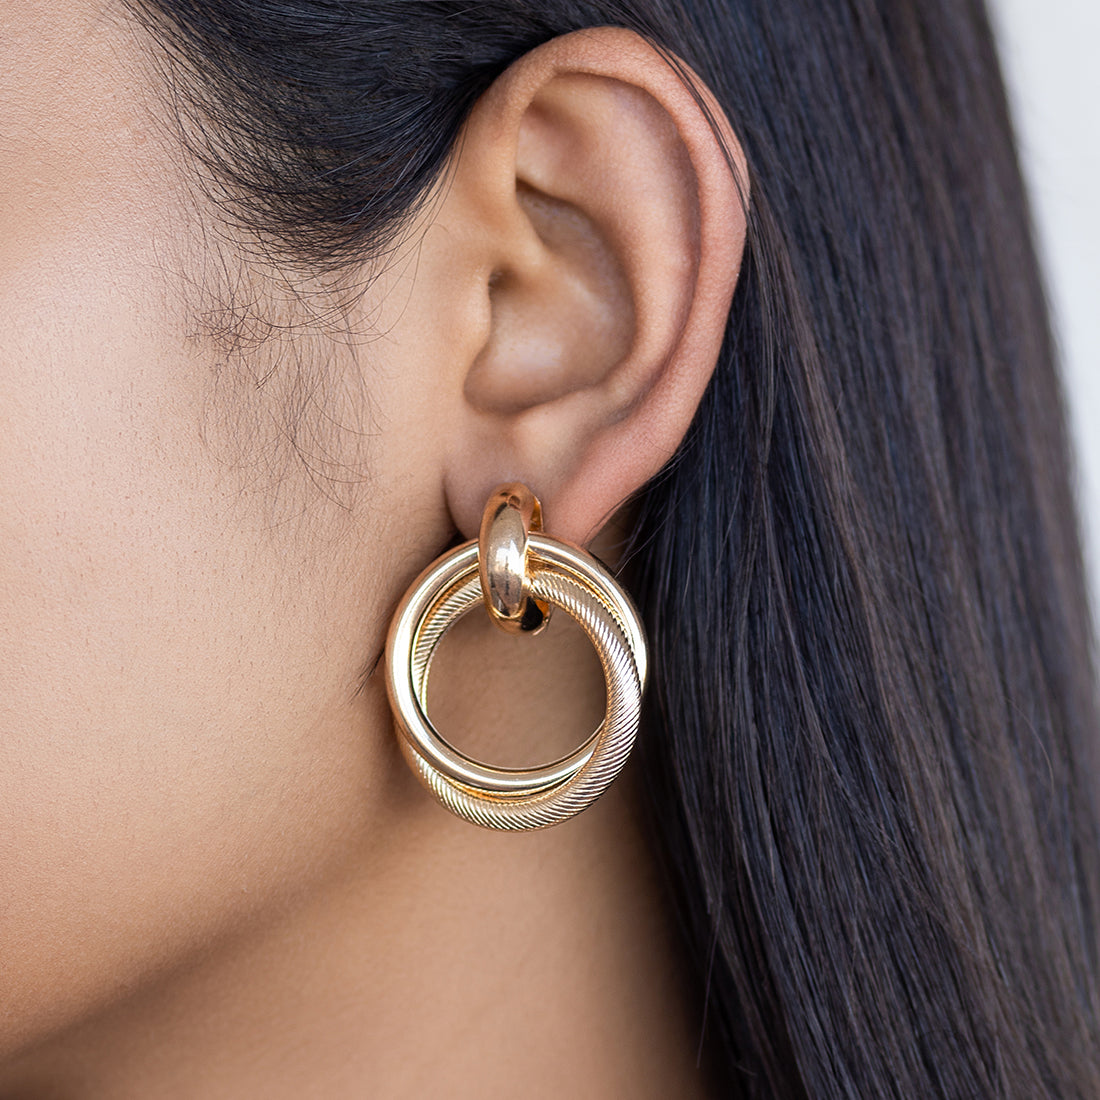 Contemporary Bold Gold-Toned Oversized Circular Layered Stud Earrings